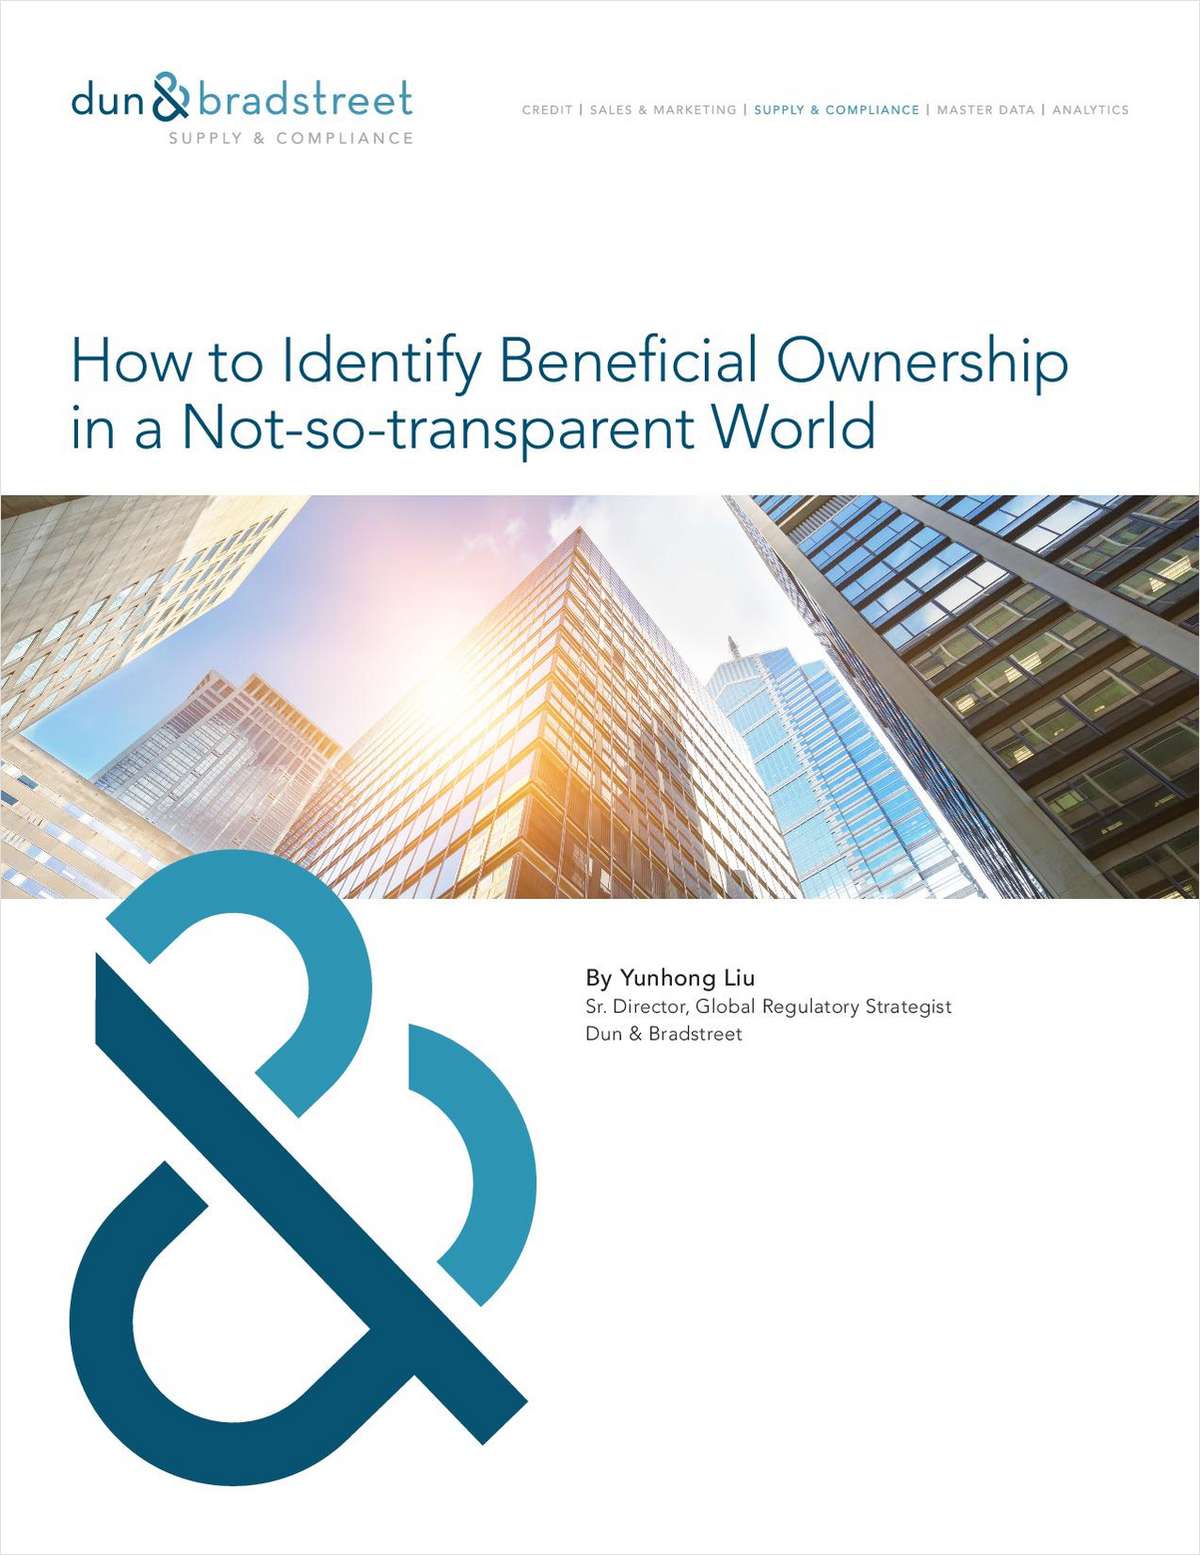 How to Identify Beneficial Ownership in a Not-so-transparent World